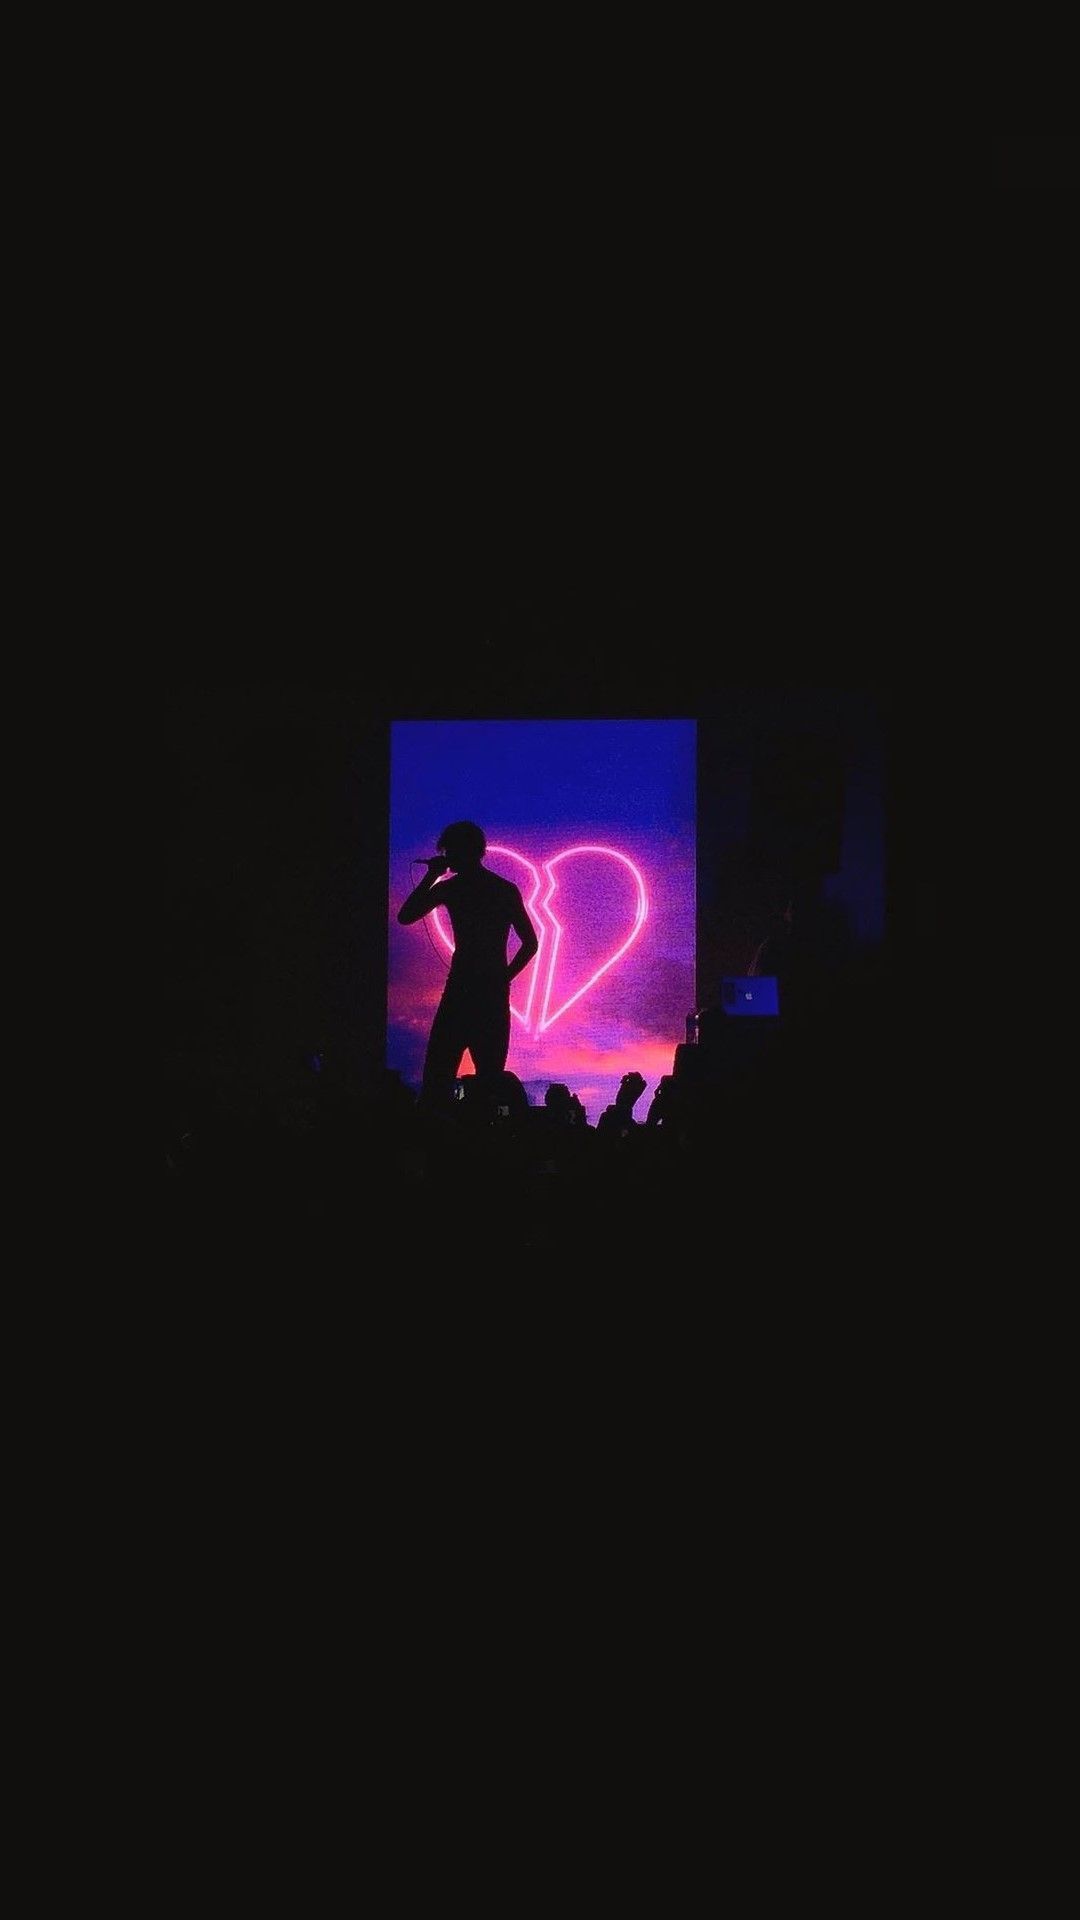 A man in the dark with purple lighting - The Weeknd